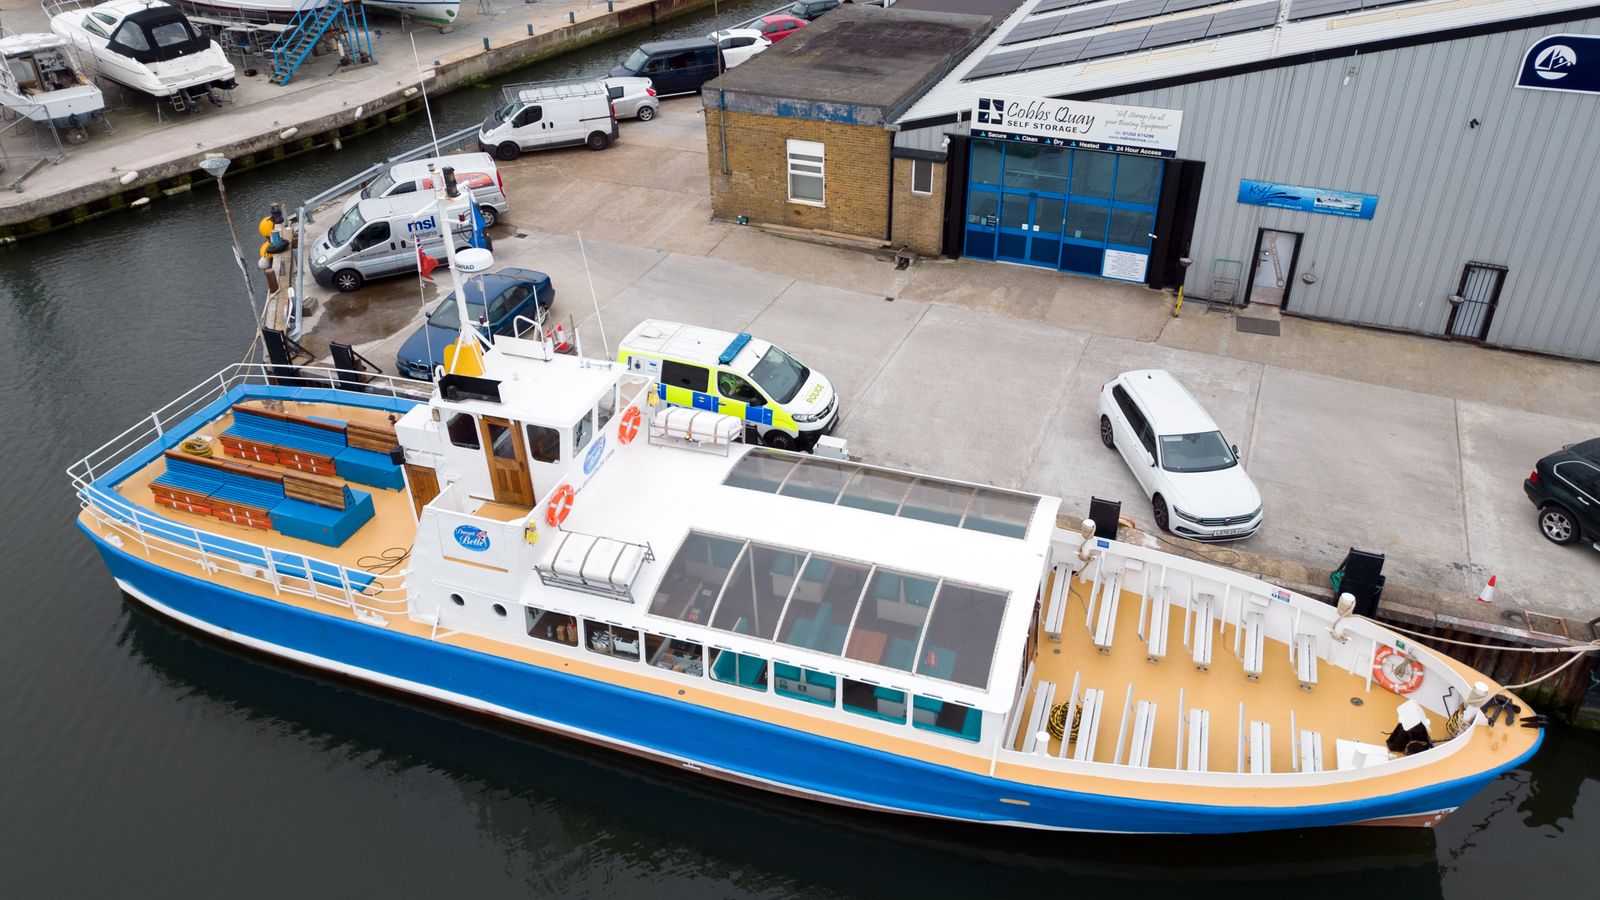 Bournemouth beach deaths: Inspections continue of Dorset Belle sightseeing boat 